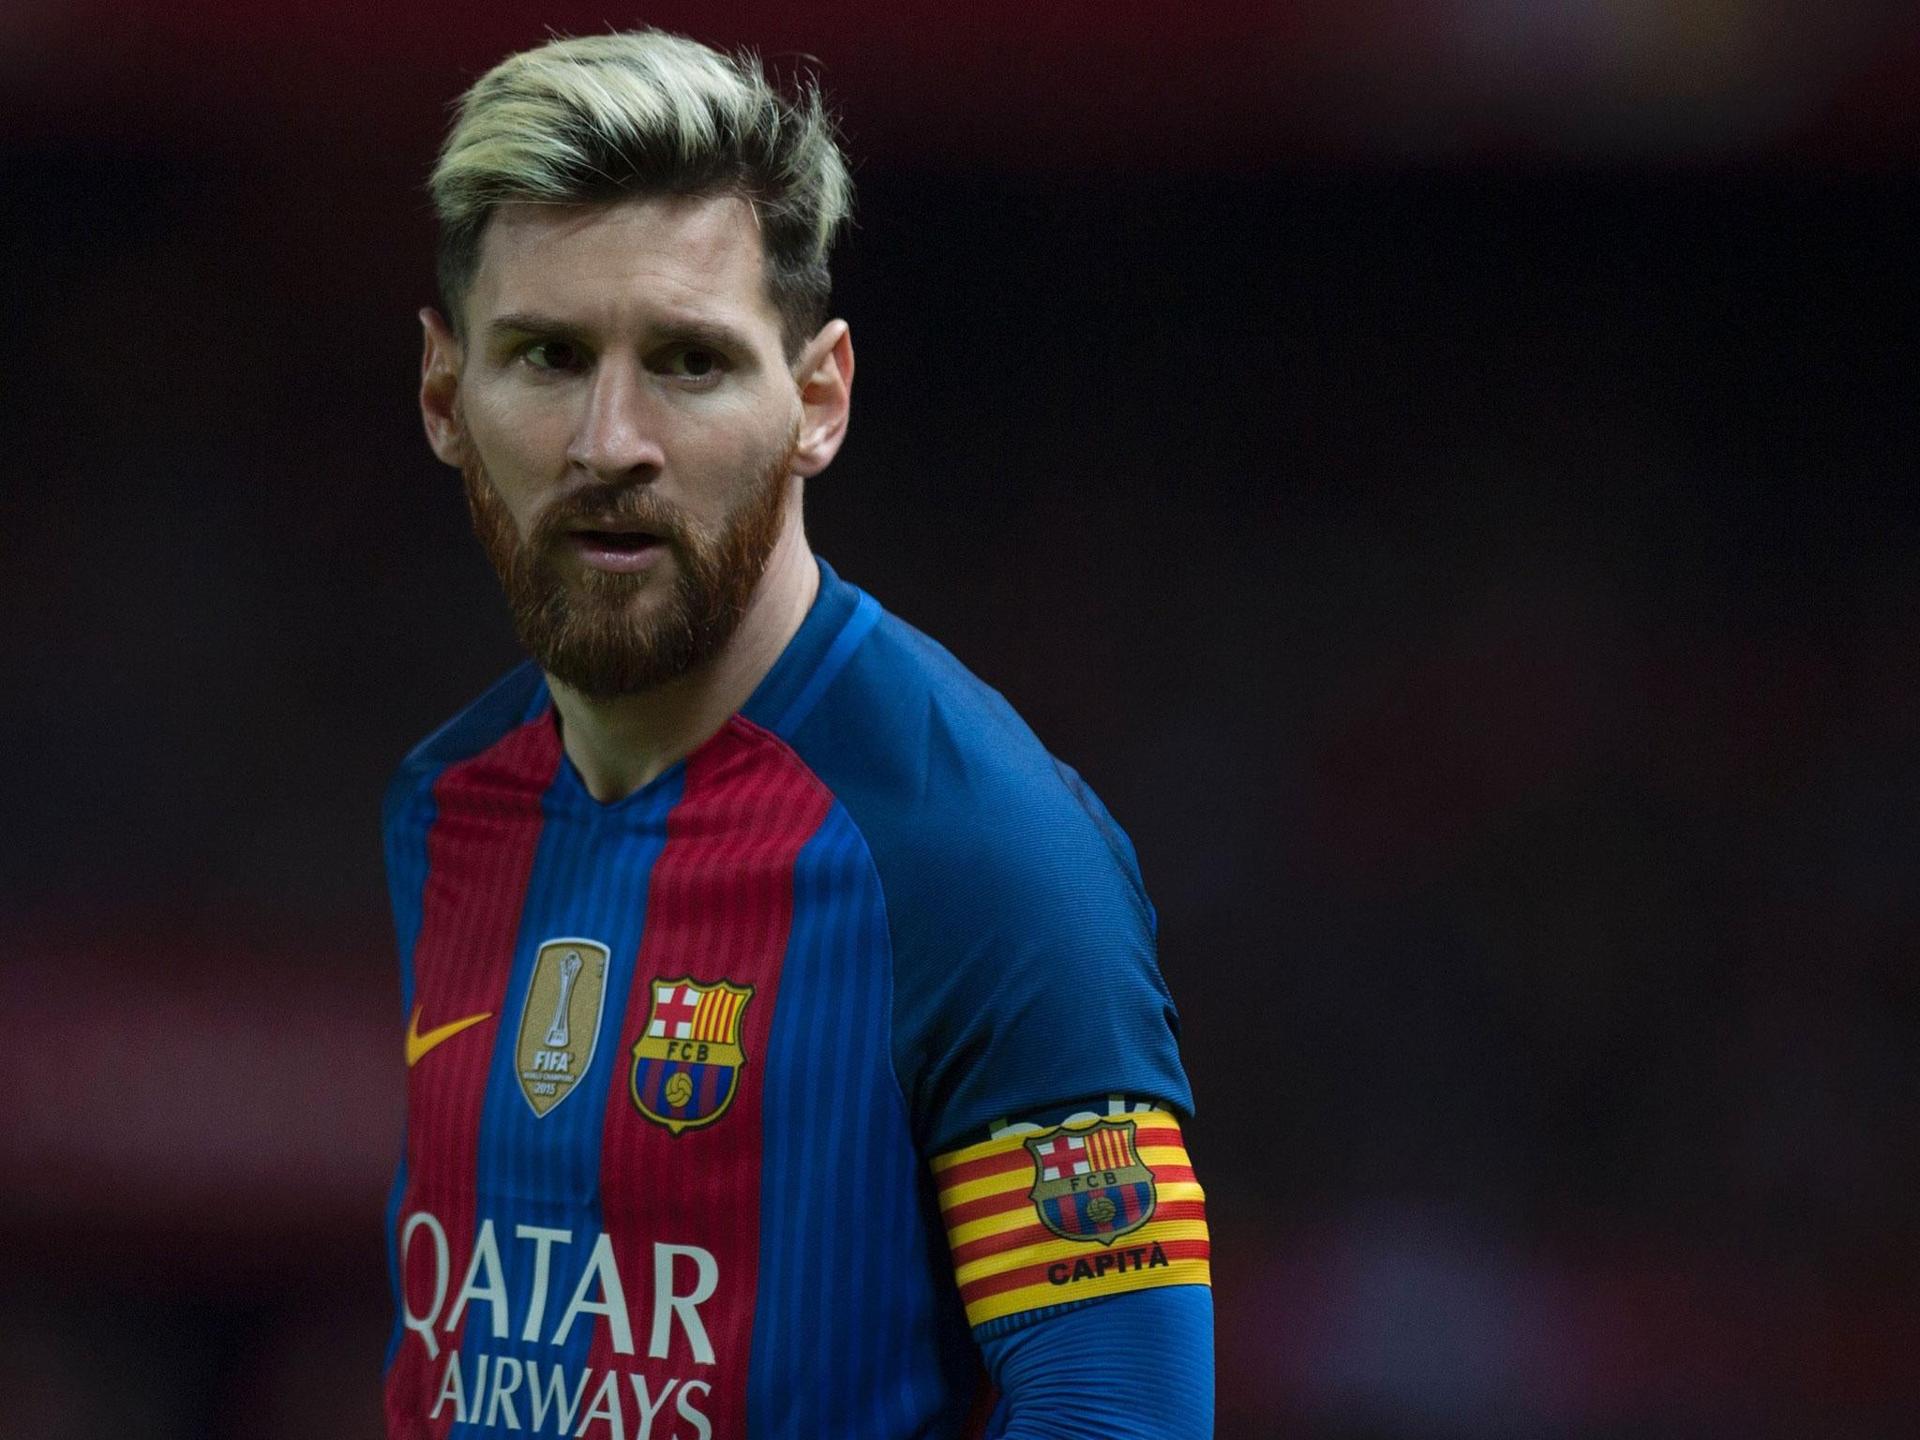 Barcelona strikes new contract agreement with Messi